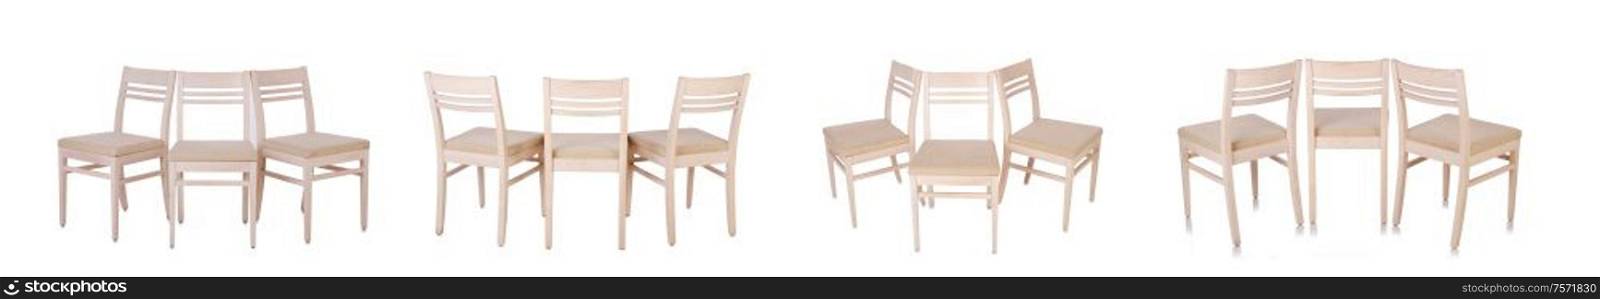 The row of chairs isolated on the white. Row of chairs isolated on the white